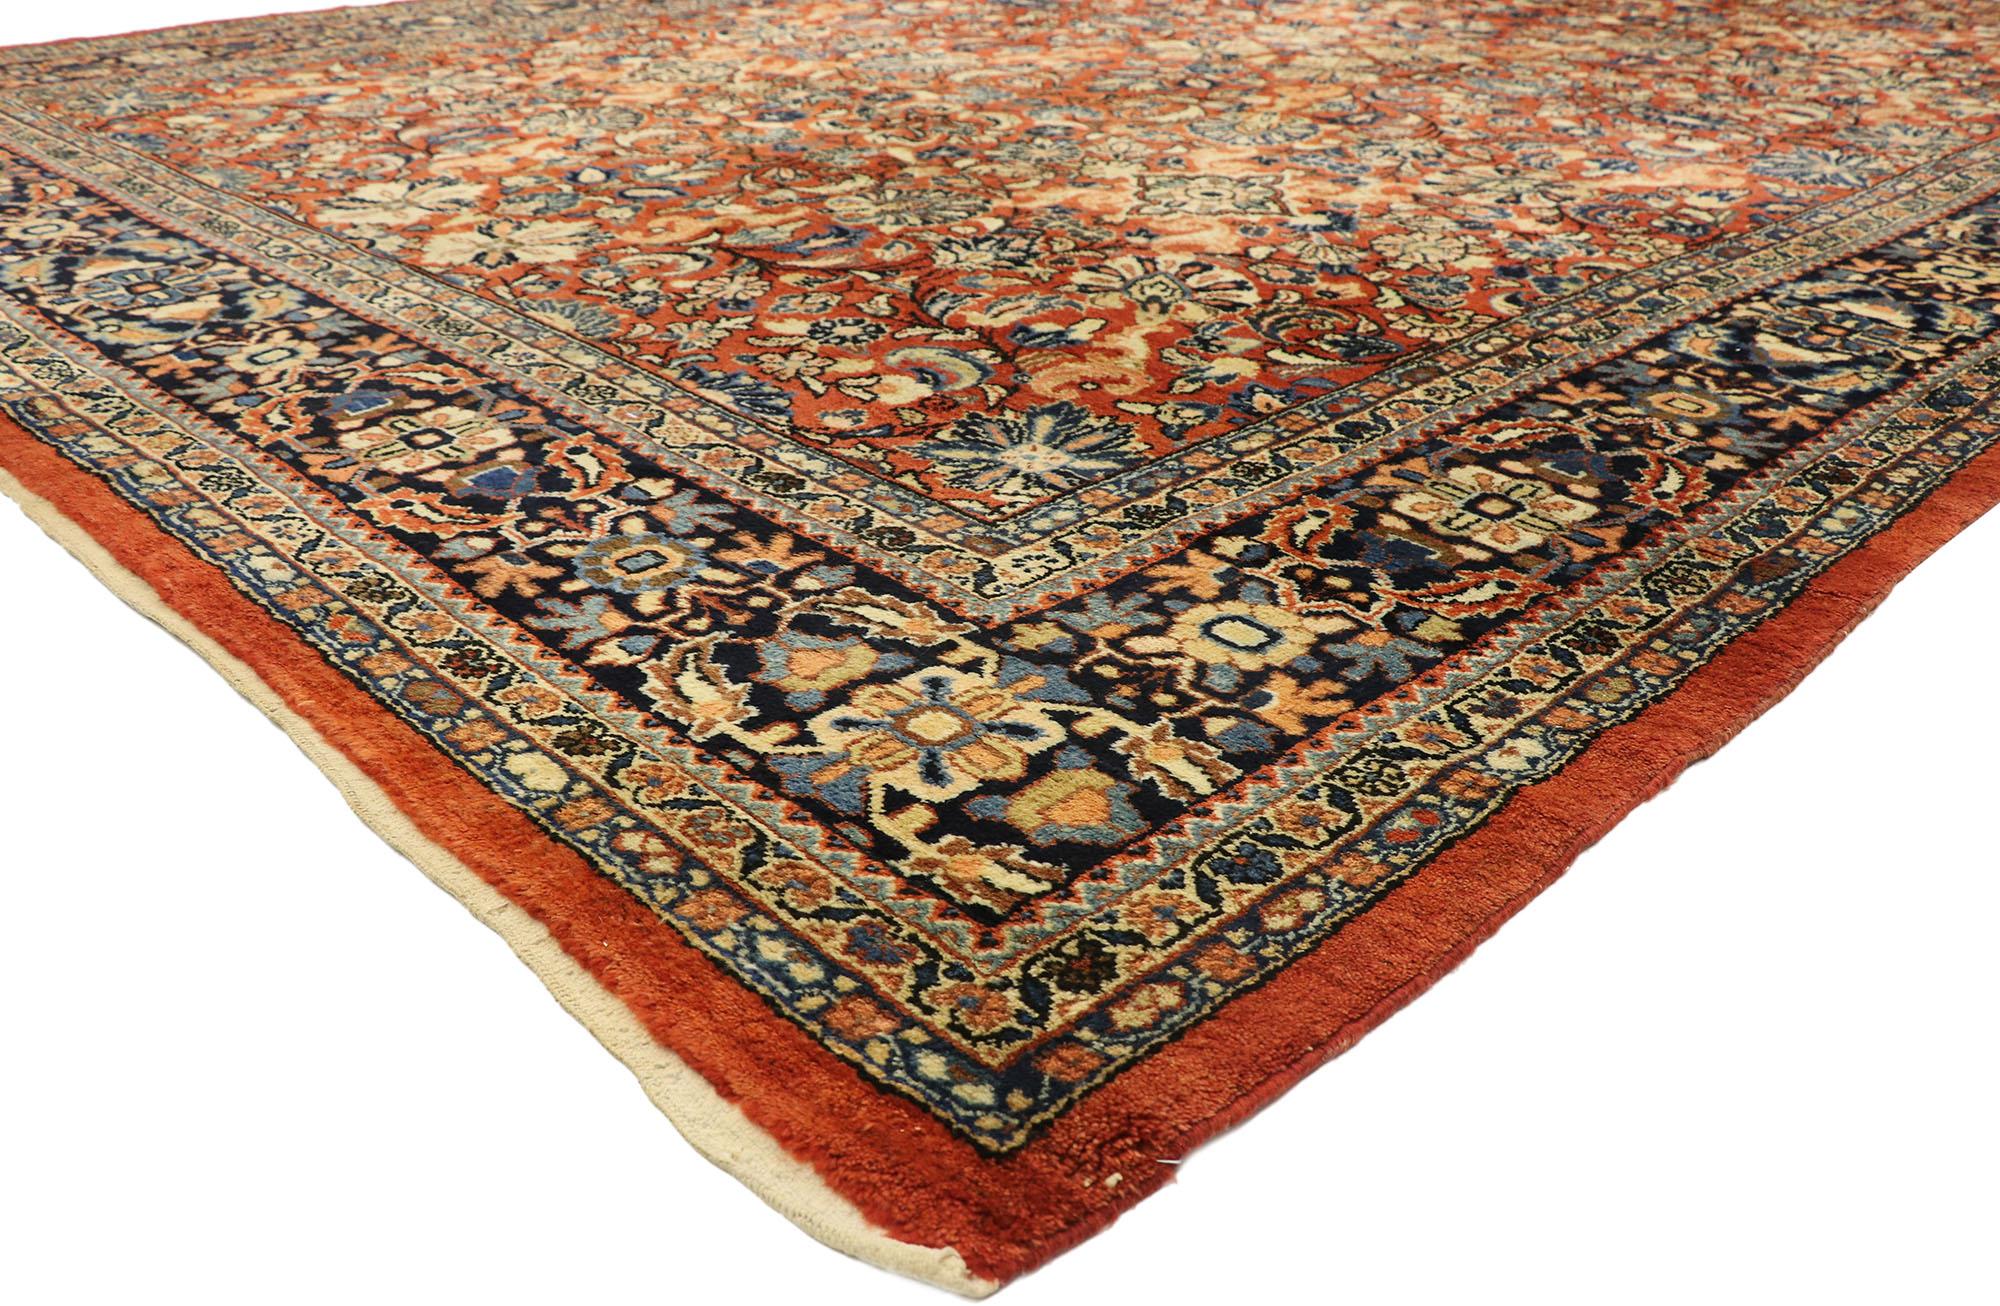 Hand-Knotted Antique Persian Mahal Rug with Traditional Federal and American Colonial Style